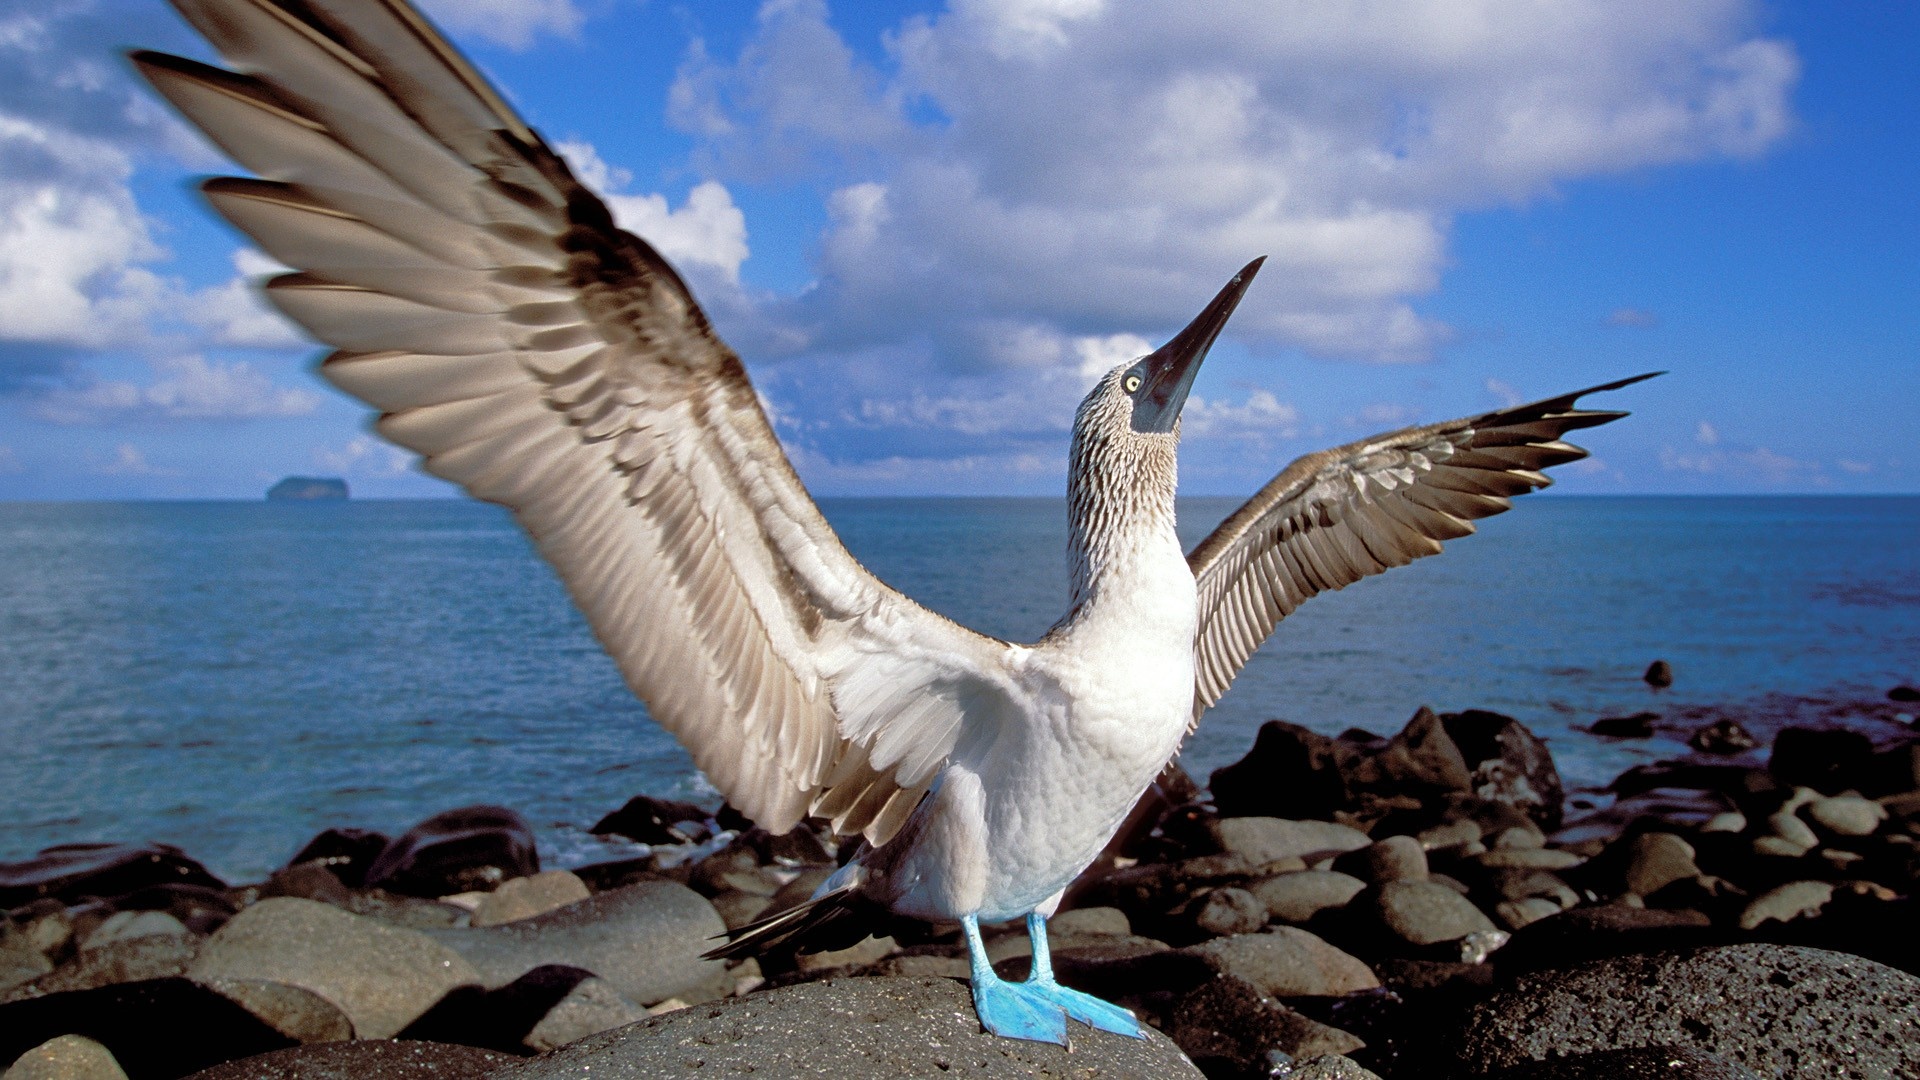 Blue footed booby wallpapers, Booby bird, 1920x1080 Full HD Desktop